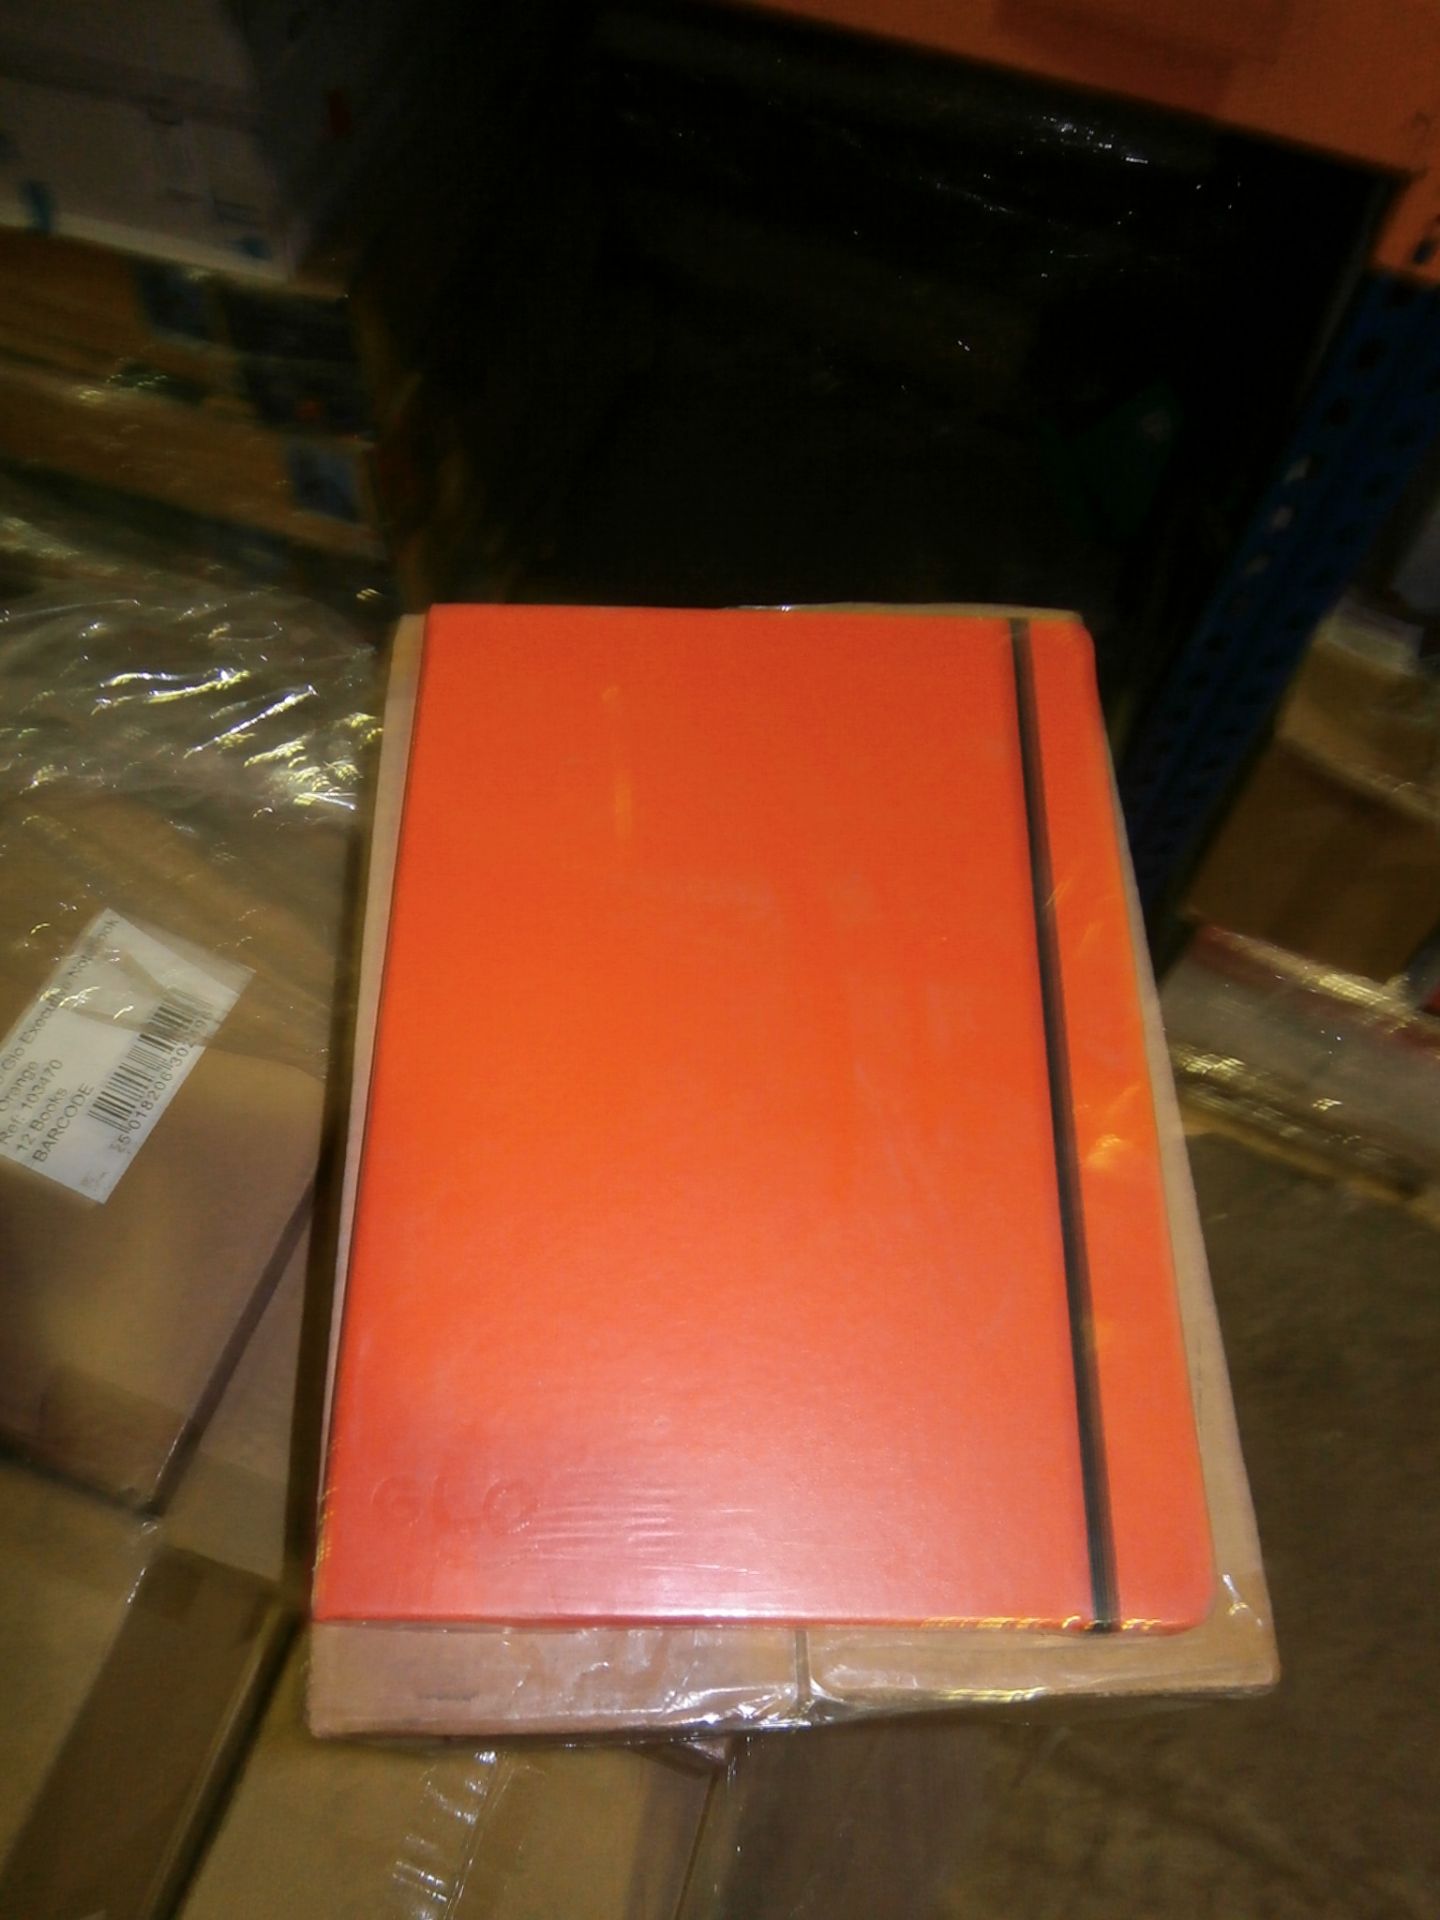 15 x Boxes of Glo Executive A4 Notebooks Orange - 12 Notebooks Per Box, 180 in Total (Cheapest - Image 2 of 4